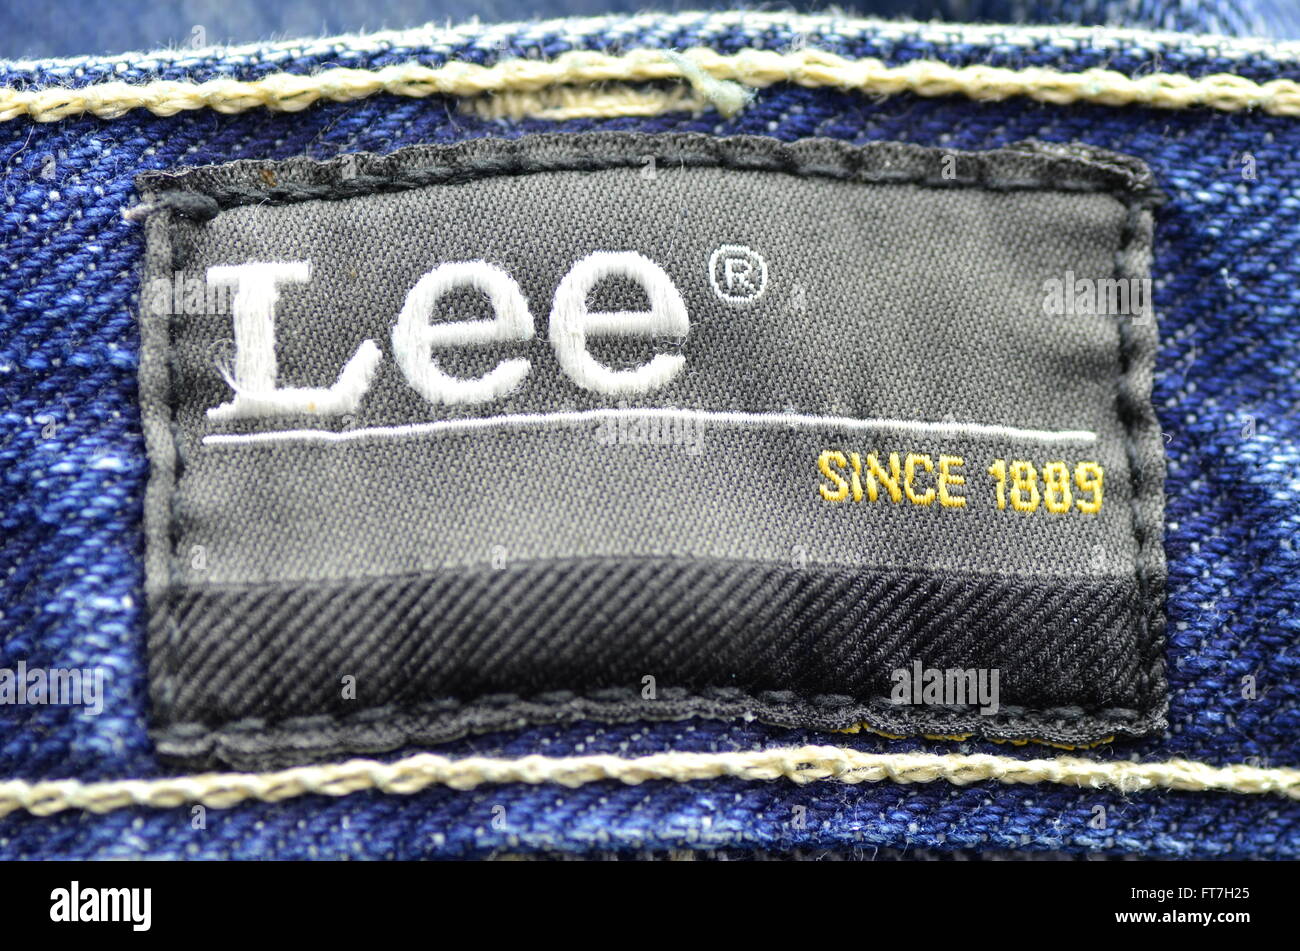 Closeup of Lee label on blue jeans Stock Photo - Alamy